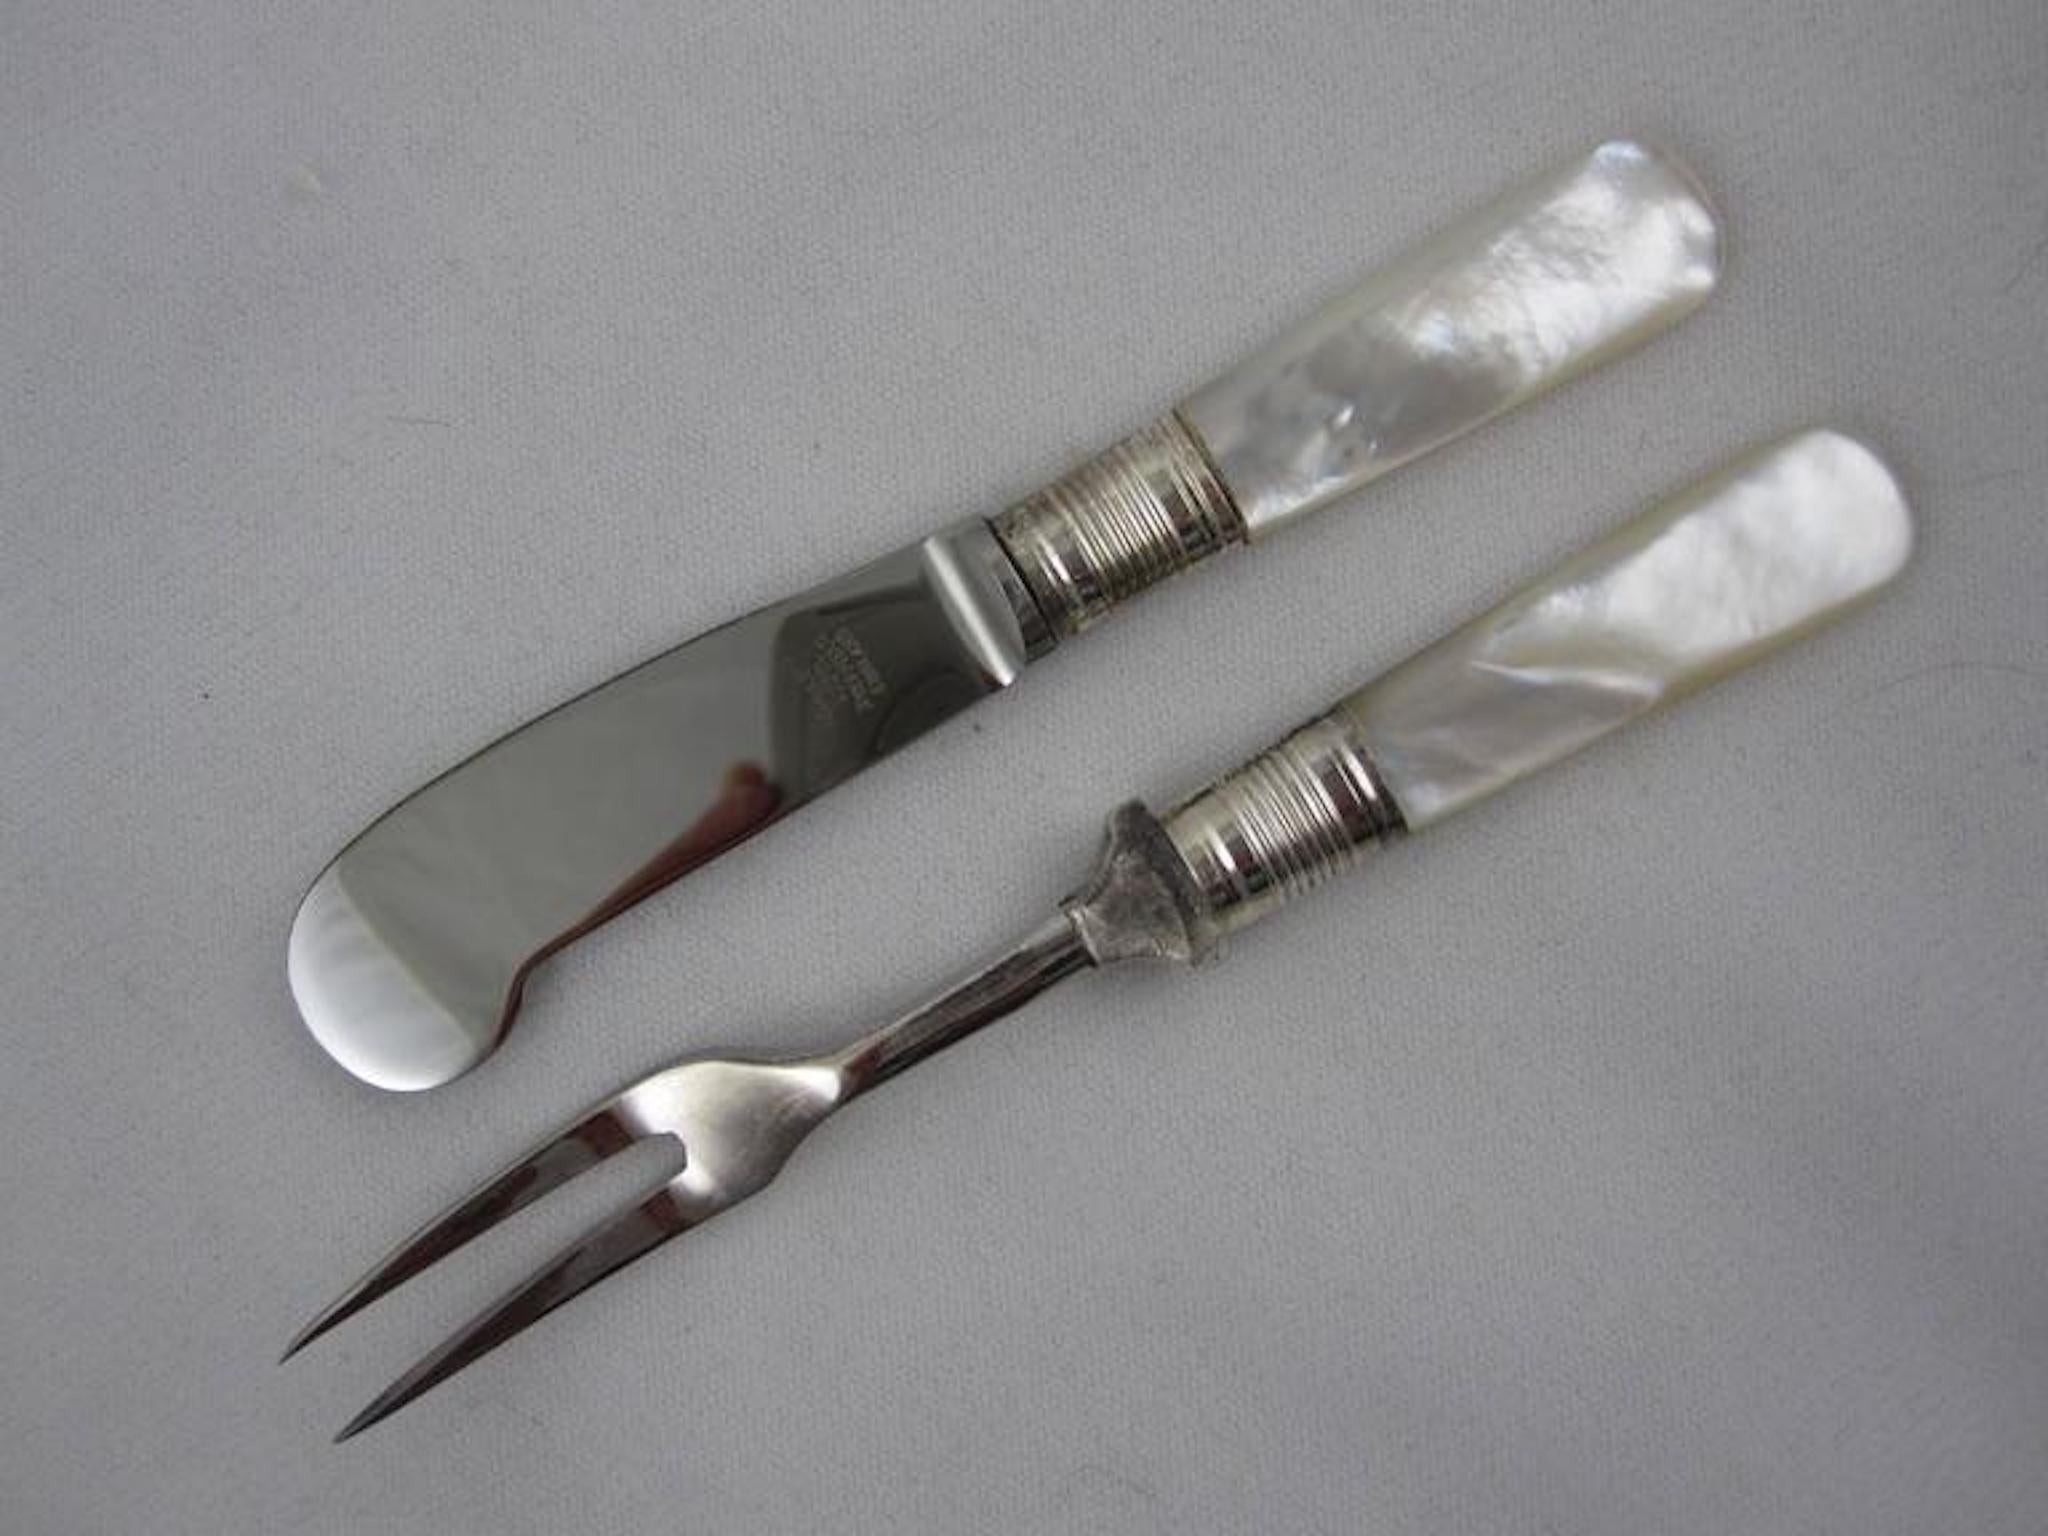  Sheffield Silver & Pearl Handle Antipasto, Seafood or Hors d’Oeuvre Forks- S/12 1